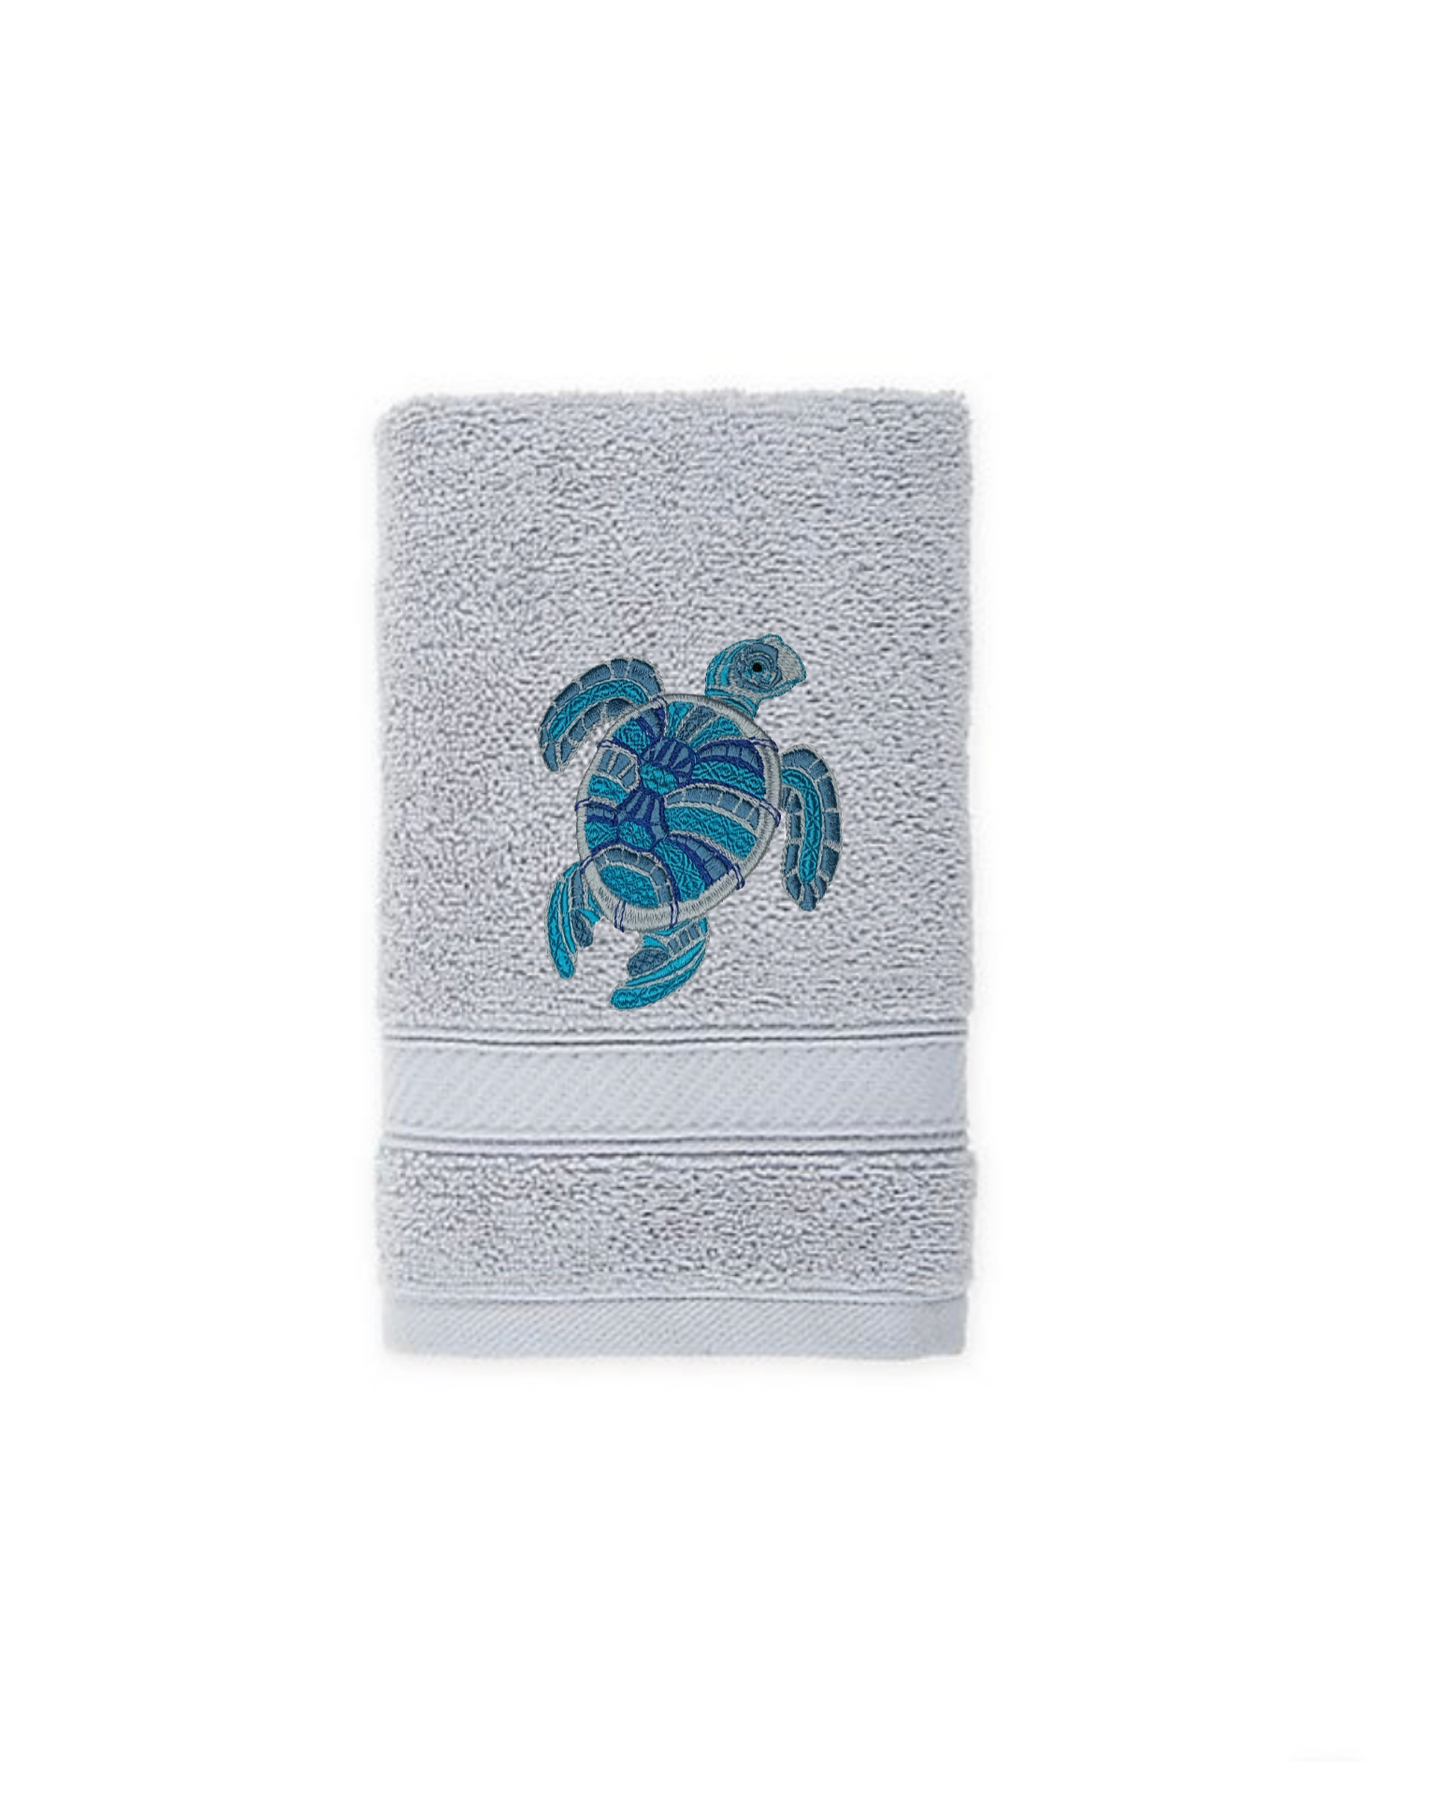 Embroidered Hand Towel Sea Turtle. Beautifully Detailed Sea Turtle in Blue or Green Embroidery